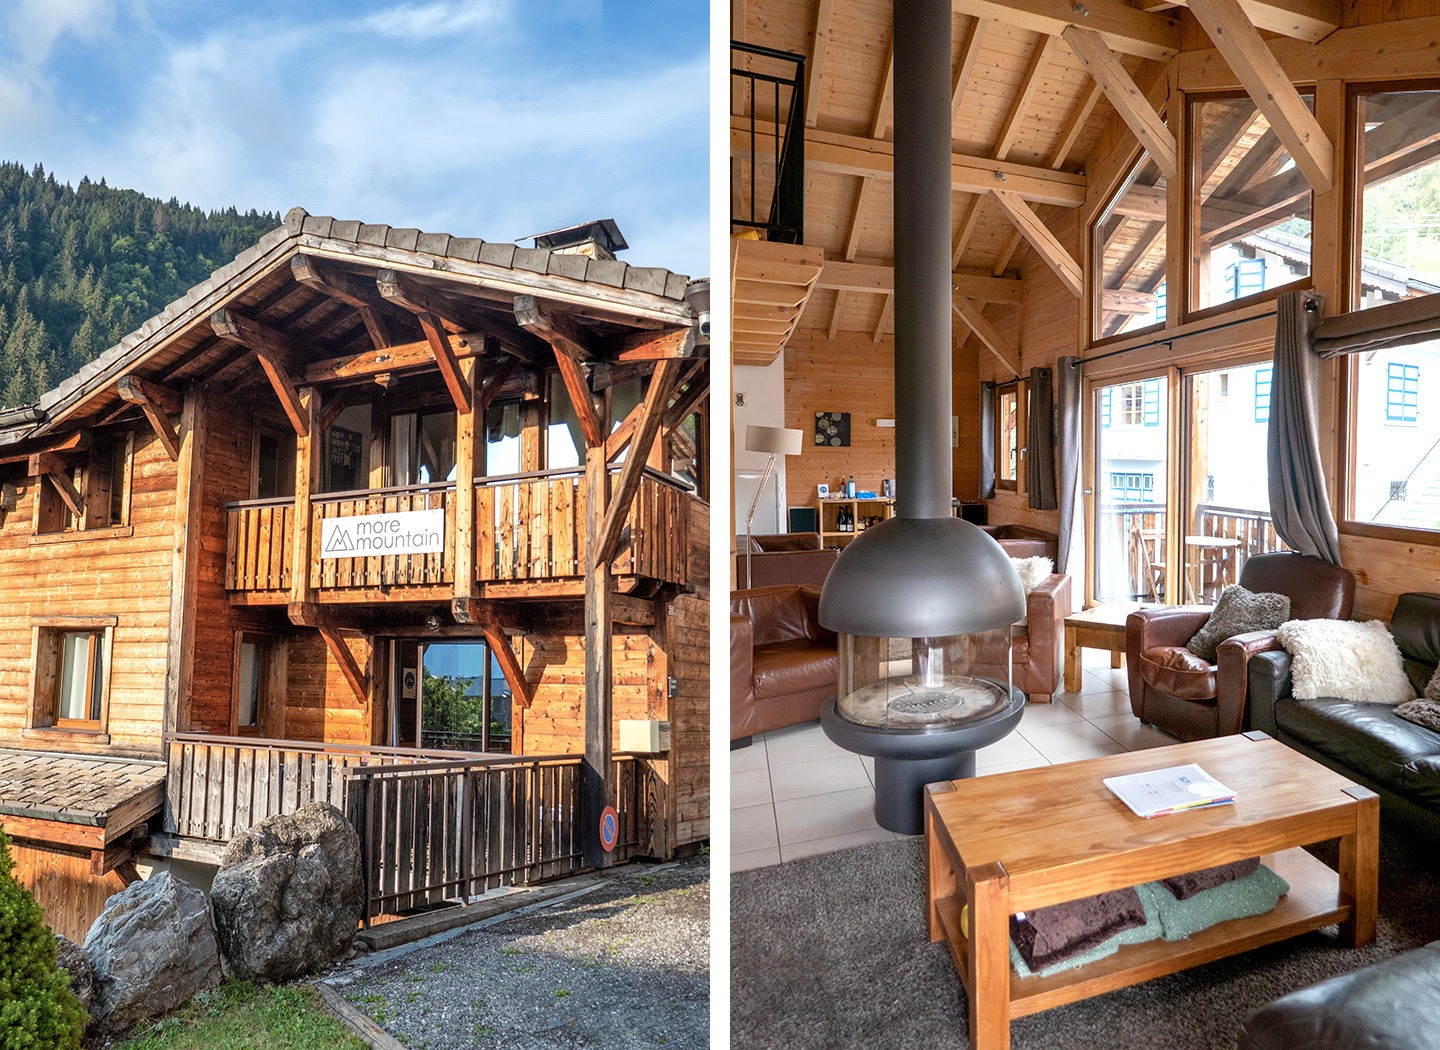 More Mountain Chalet in Morzine